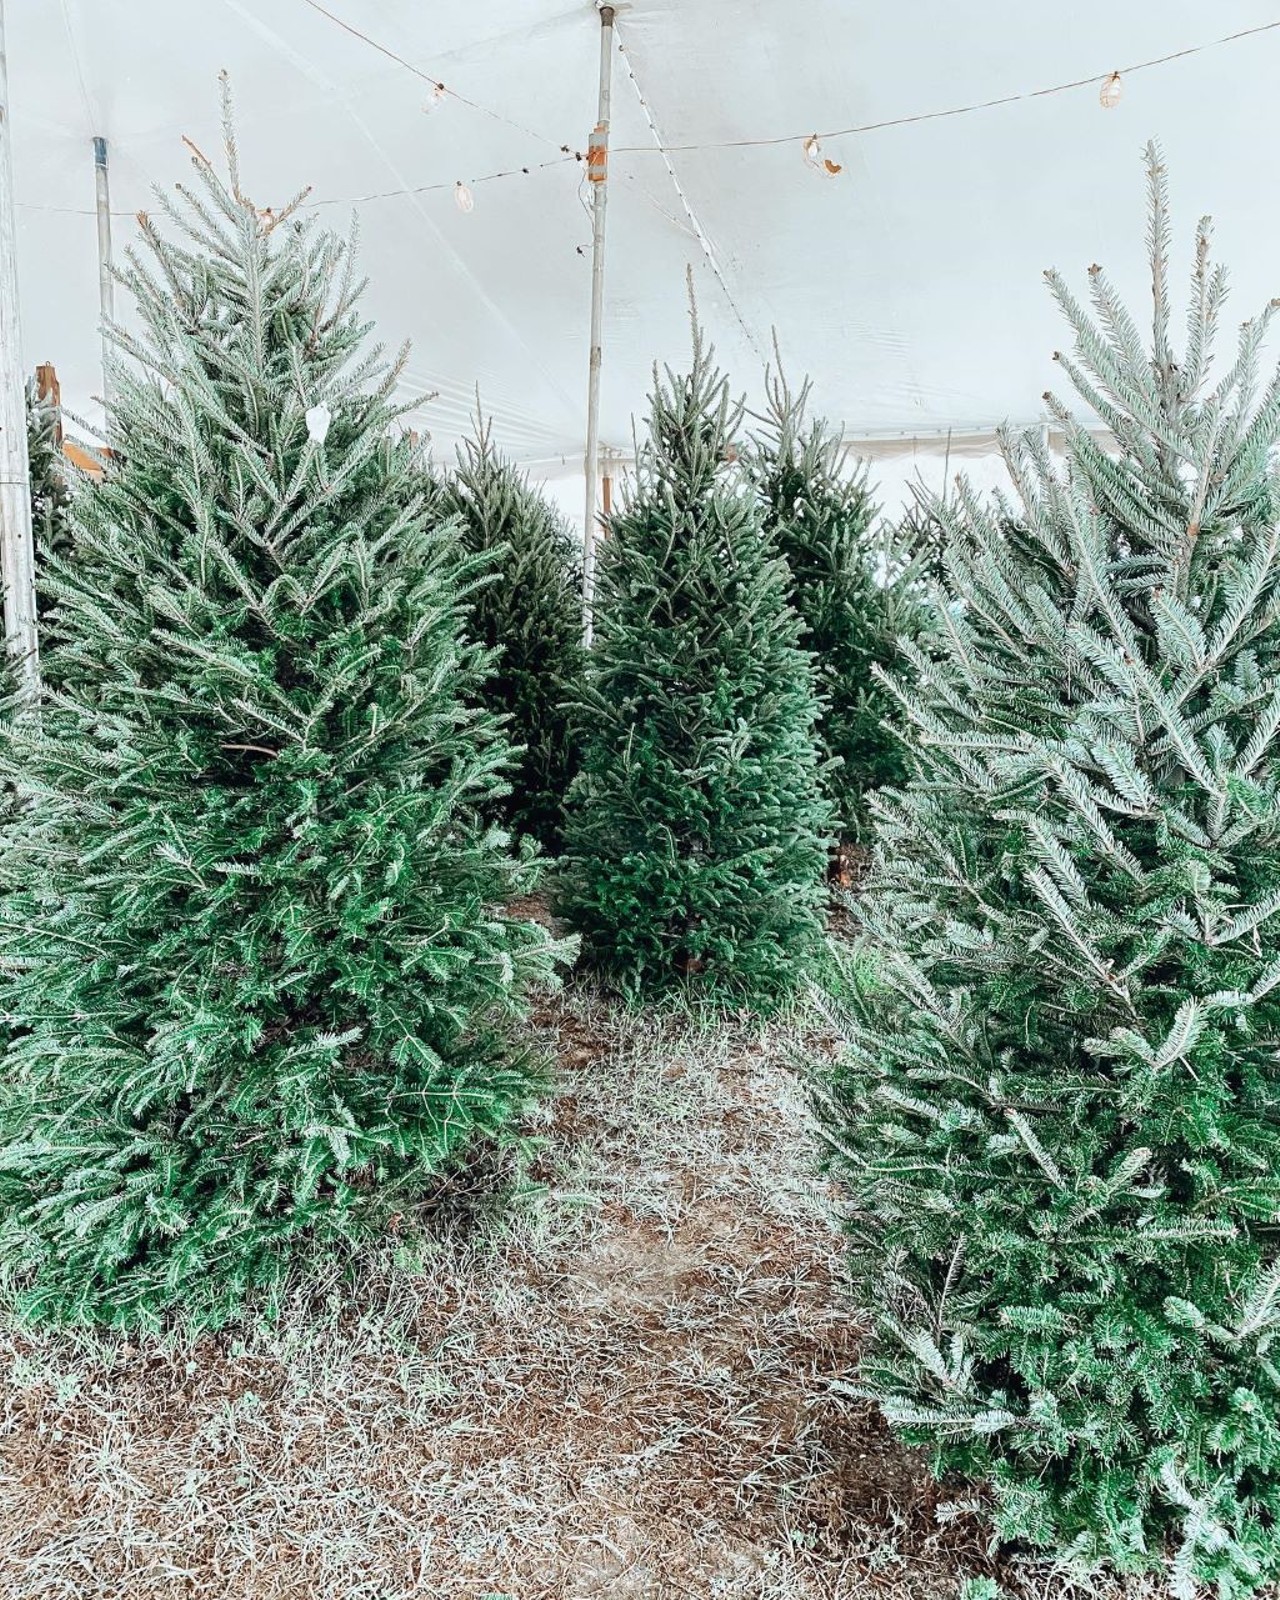 Ciro and Sons Christmas Trees 
407-536-7628, 5425 S. Apopka Vineland Road
The history of Ciro and Sons began in Claire, Michigan in 1965, when Ciro&#146;s father came up with the idea to provide quality trees in the Central Florida area. A few decades later, Ciro is still committed to the same mission with his sons alongside him. 
Photo via Ciro and Sons Christmas Trees/Facebook